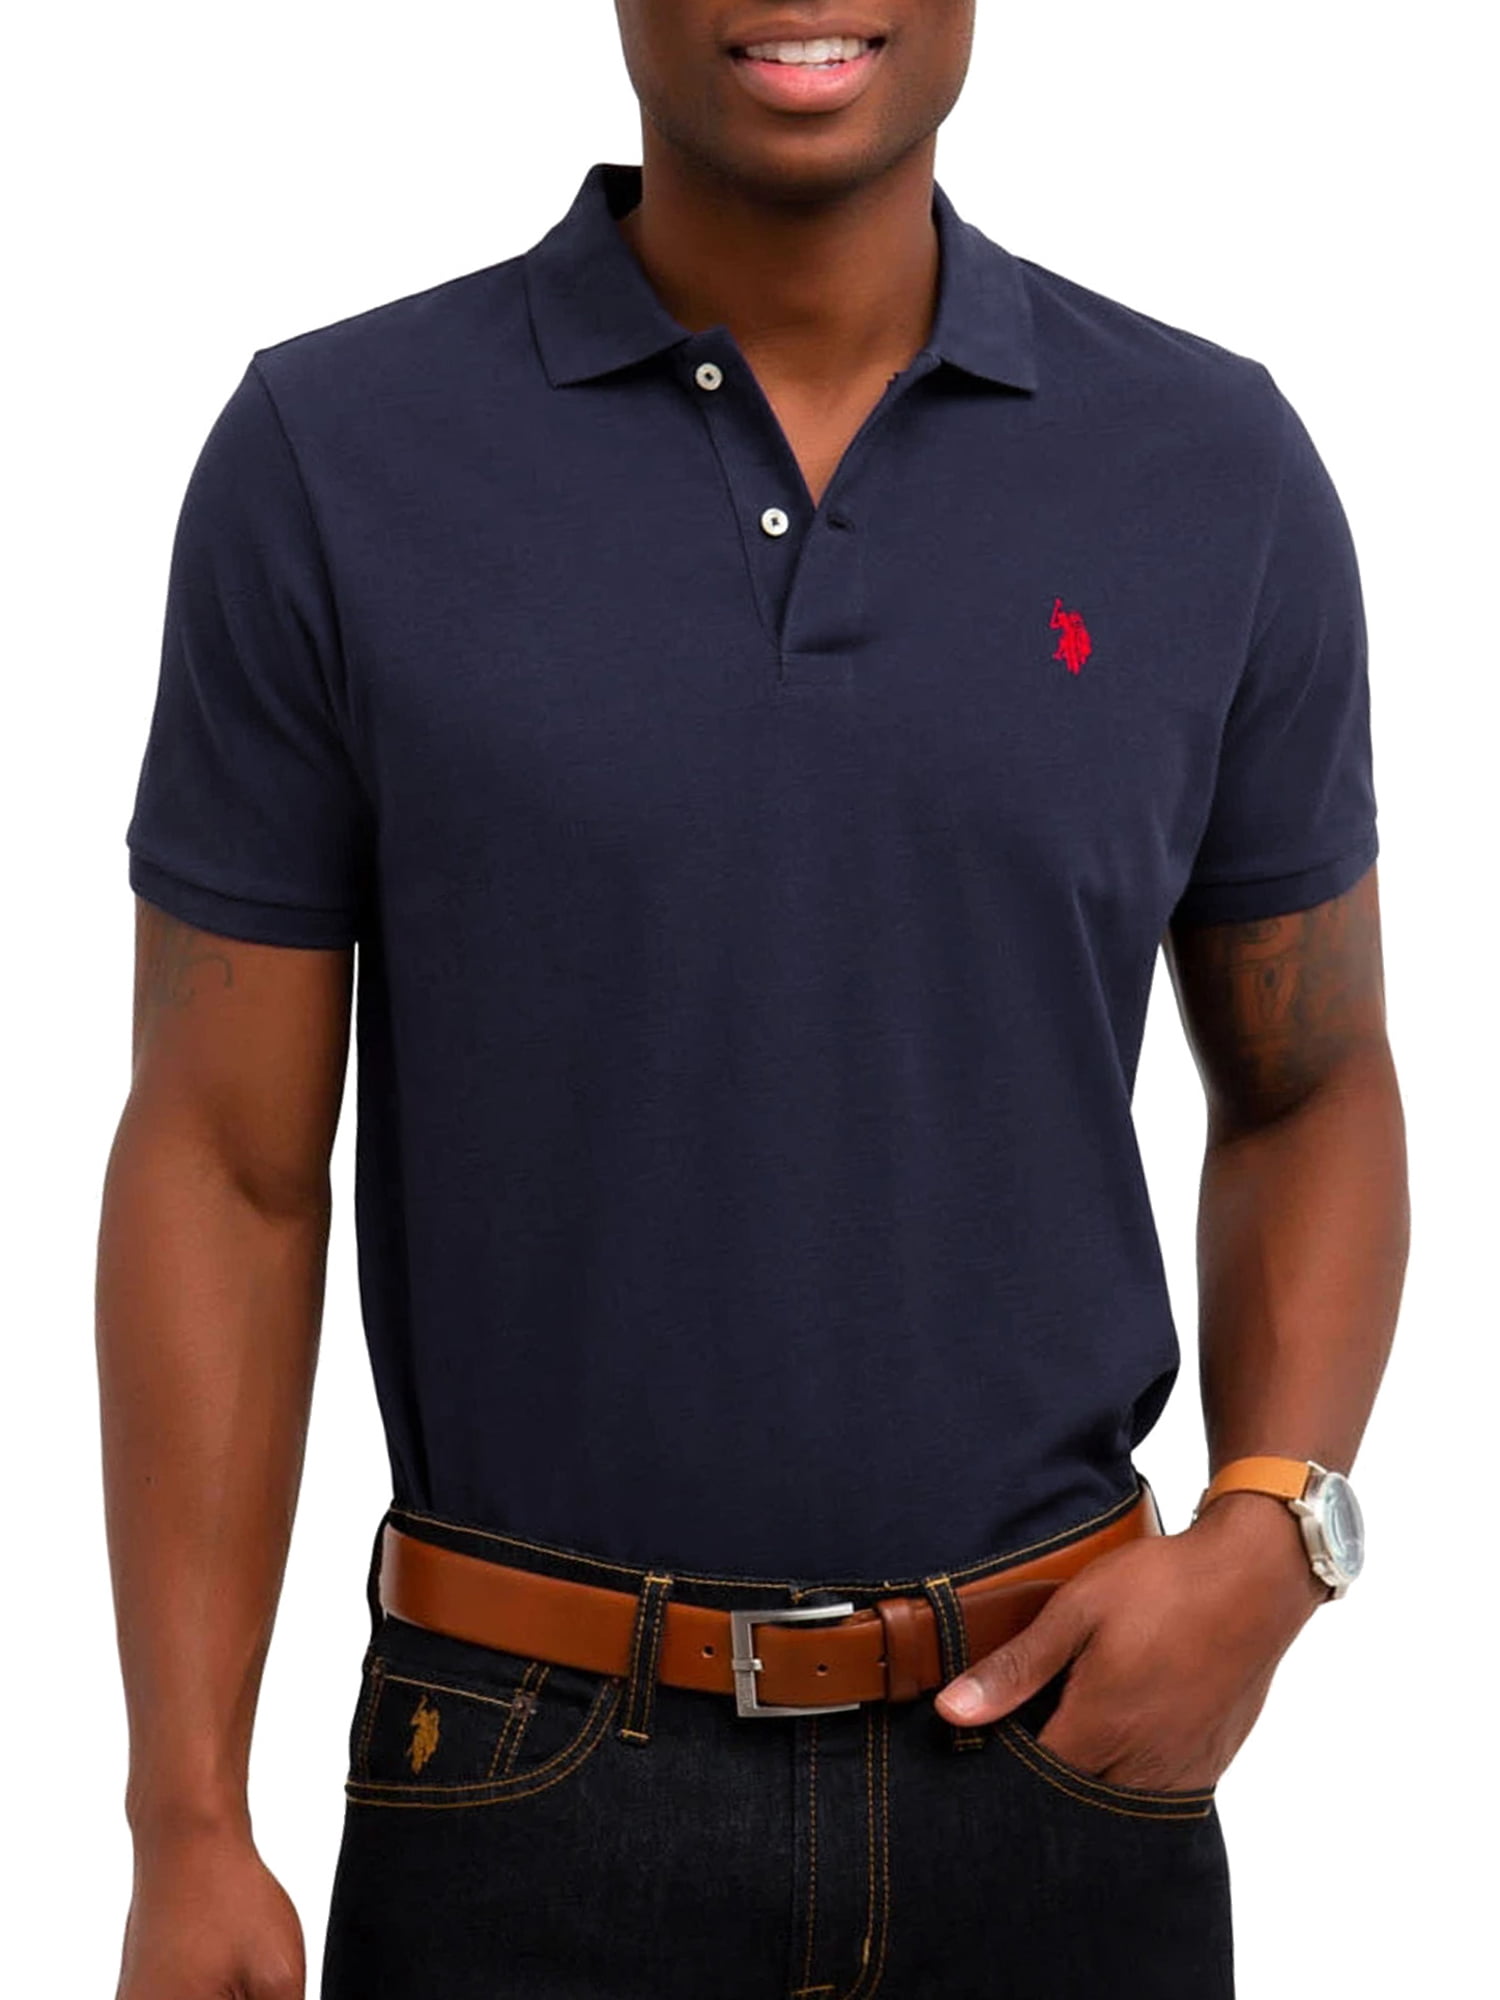 US Polo Assn. Short Sleeve Relaxed Fit Cotton Polo (Men's) 1 Pack ...